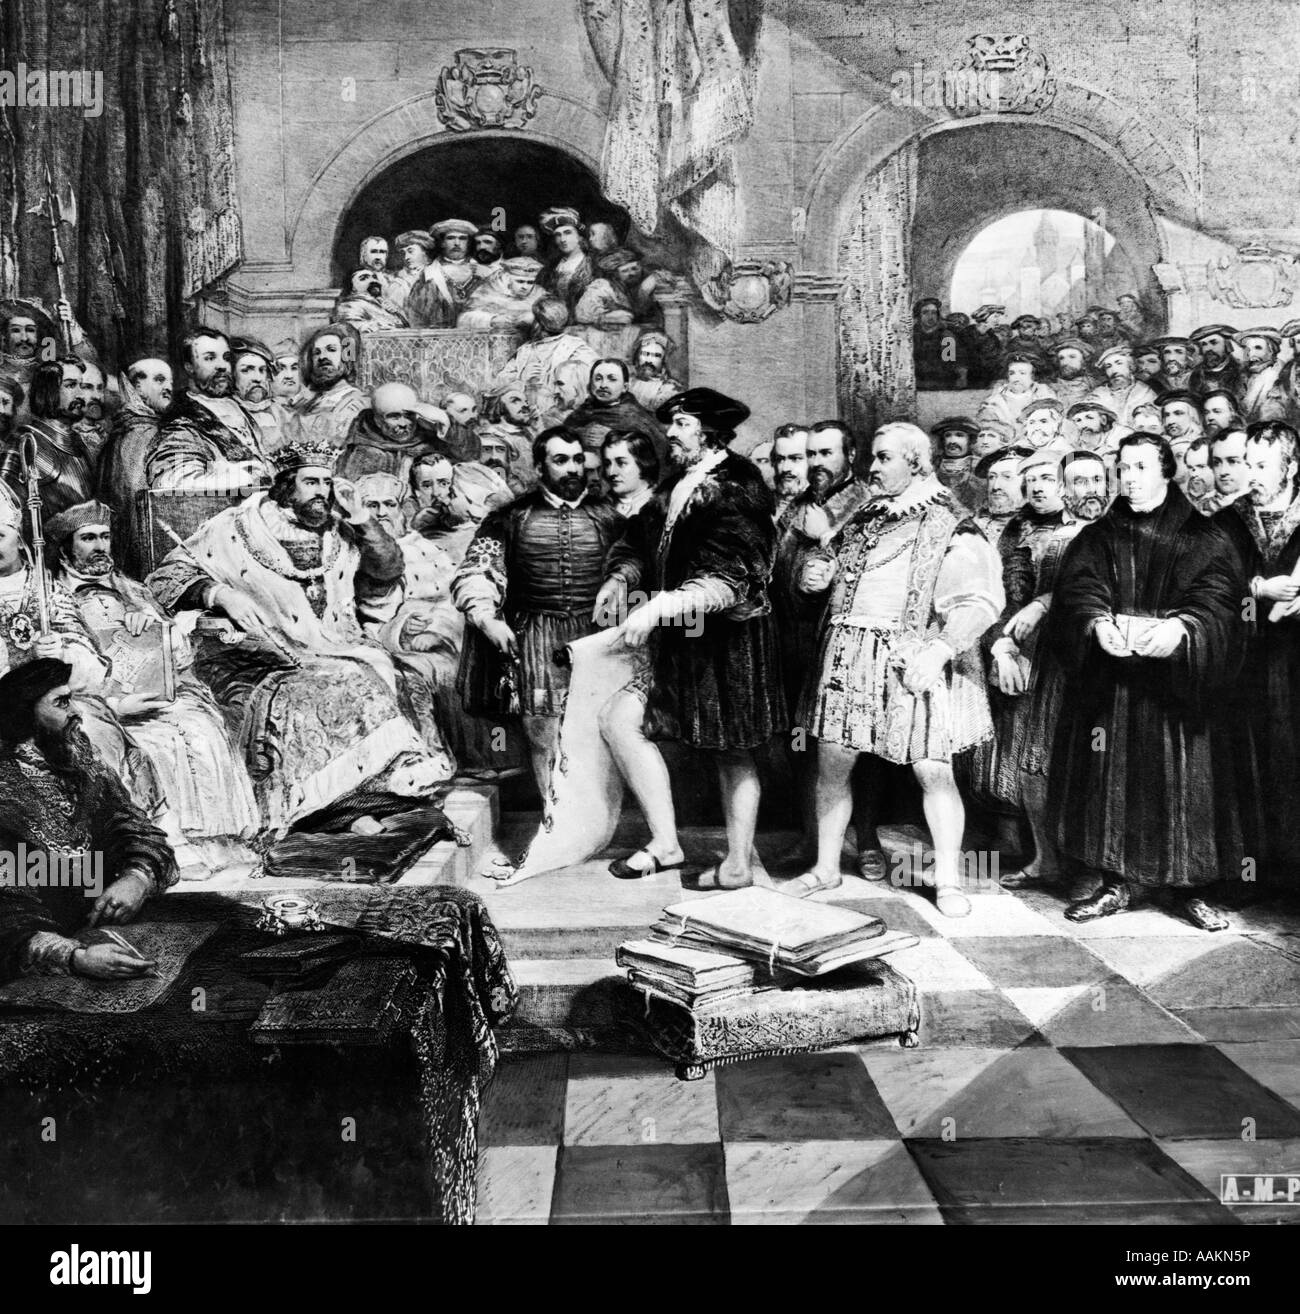 1500s MARTIN LUTHER AT DIET OF NUREMBERG THE FIRST REFORMERS PROTEST 1522 OR 1529 Stock Photo